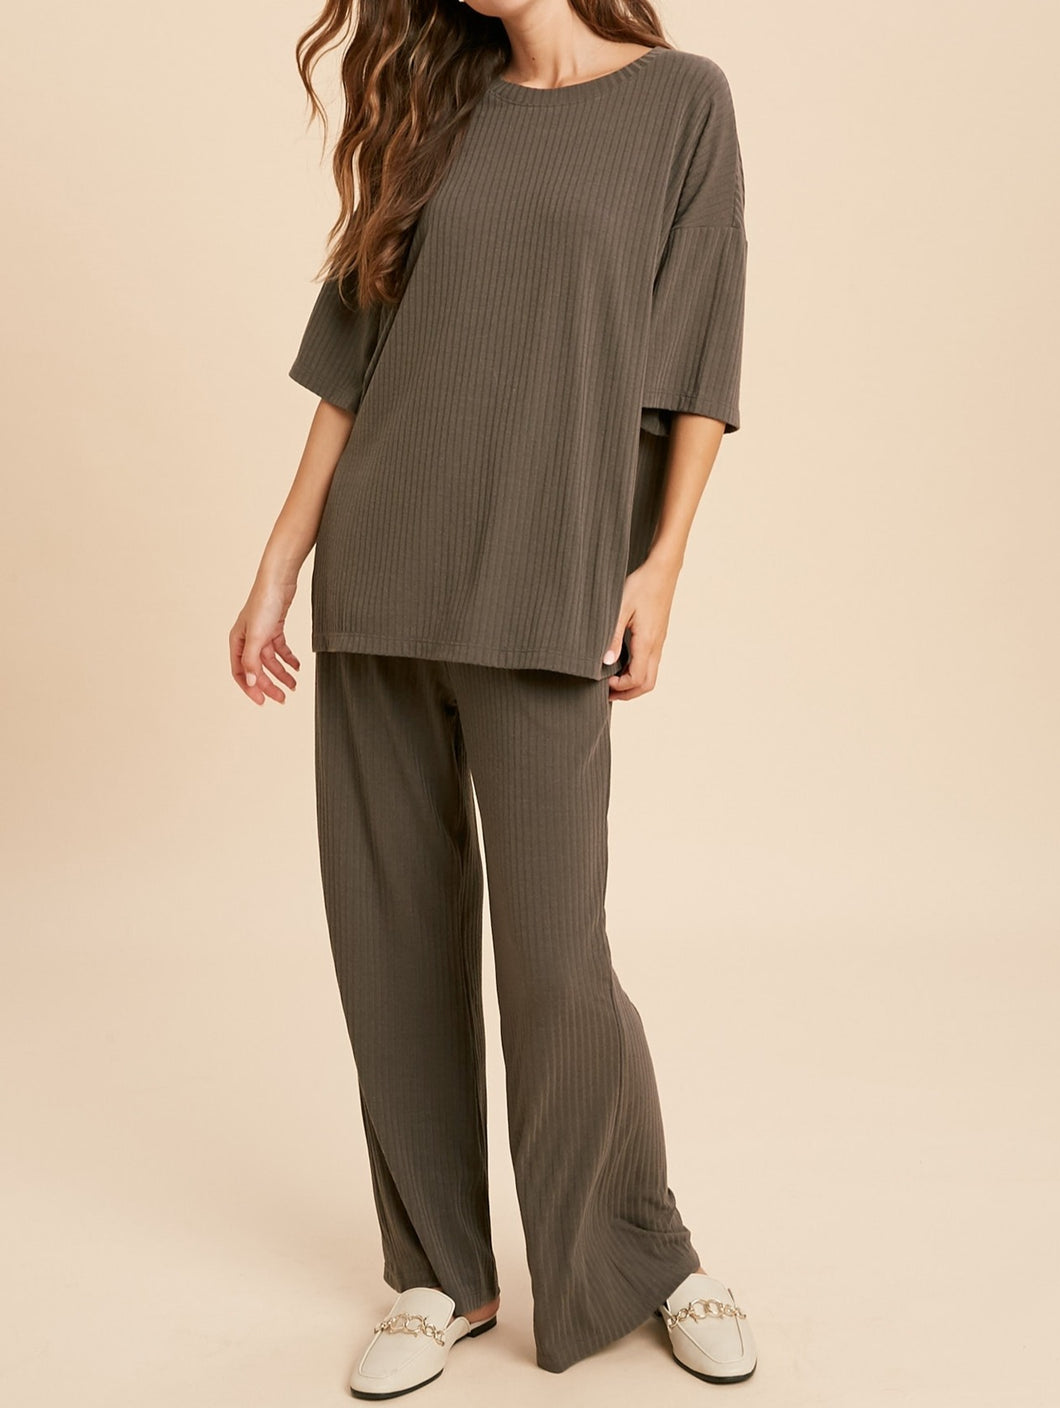 two piece rib knit casual top and pants set - charcoal